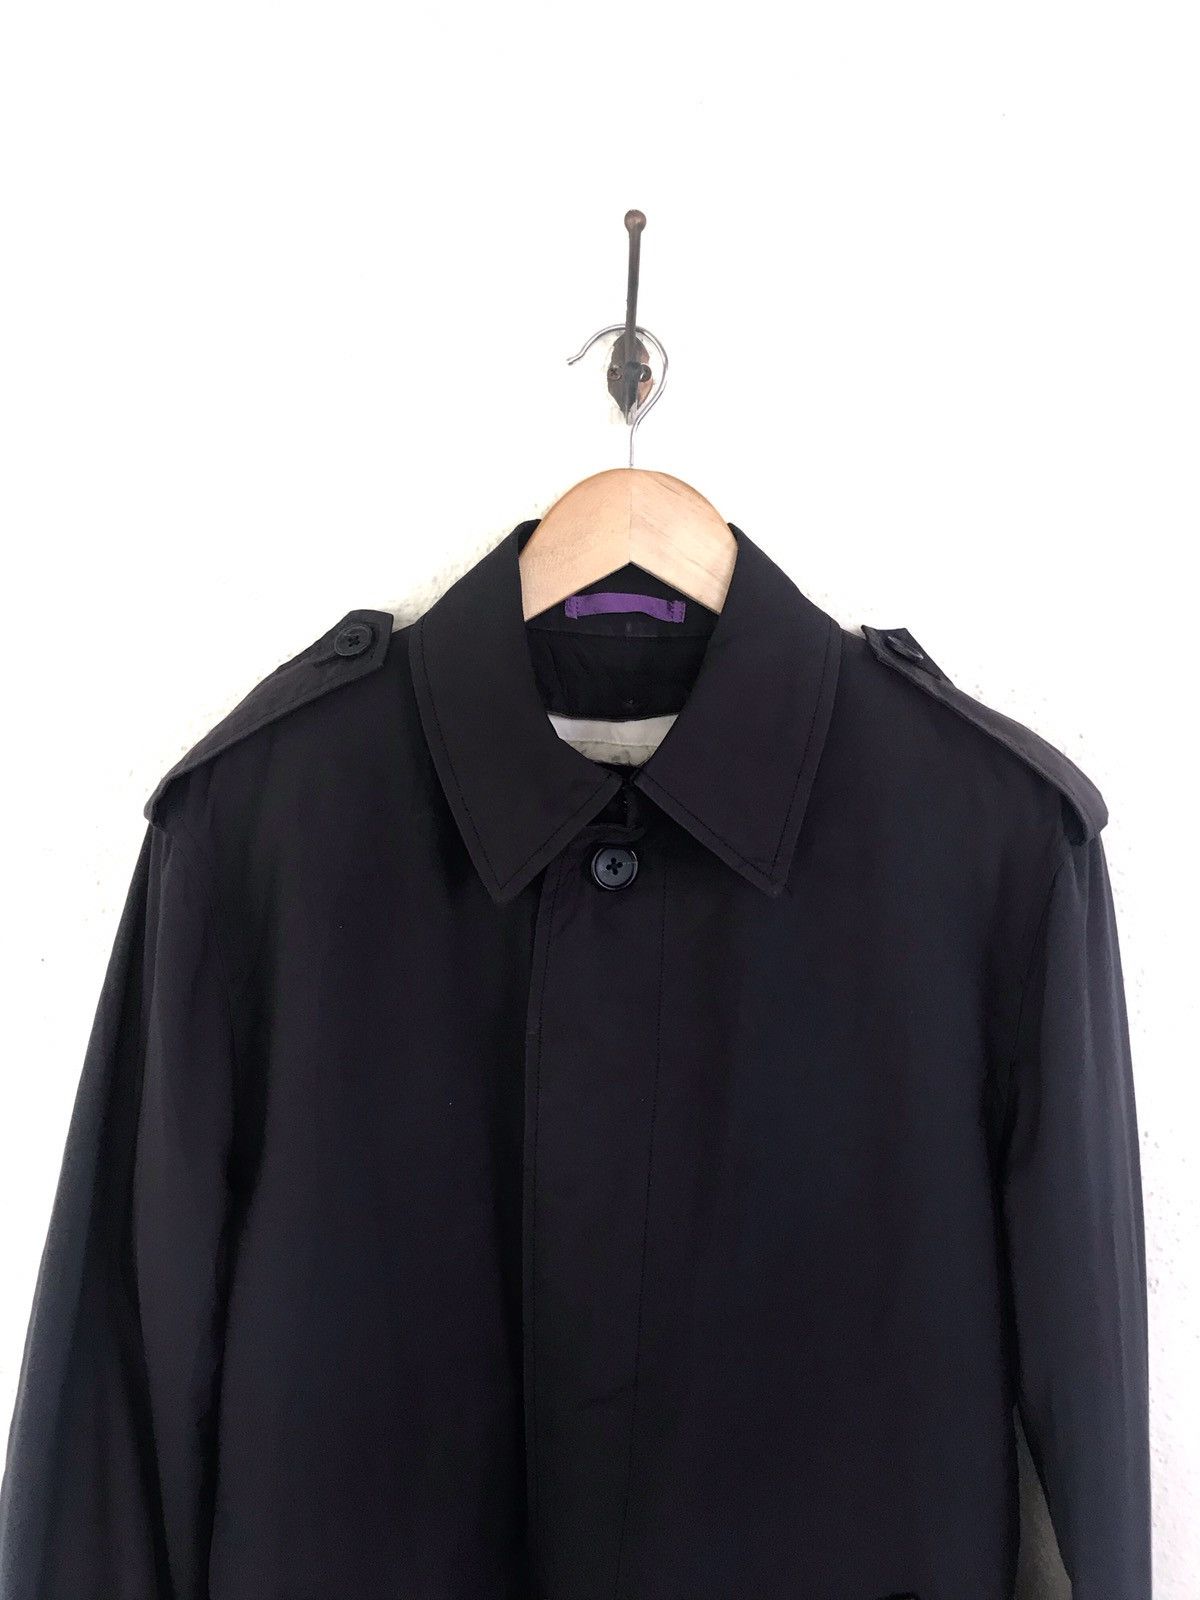 Paul Smith Collection Trench Coat - 2